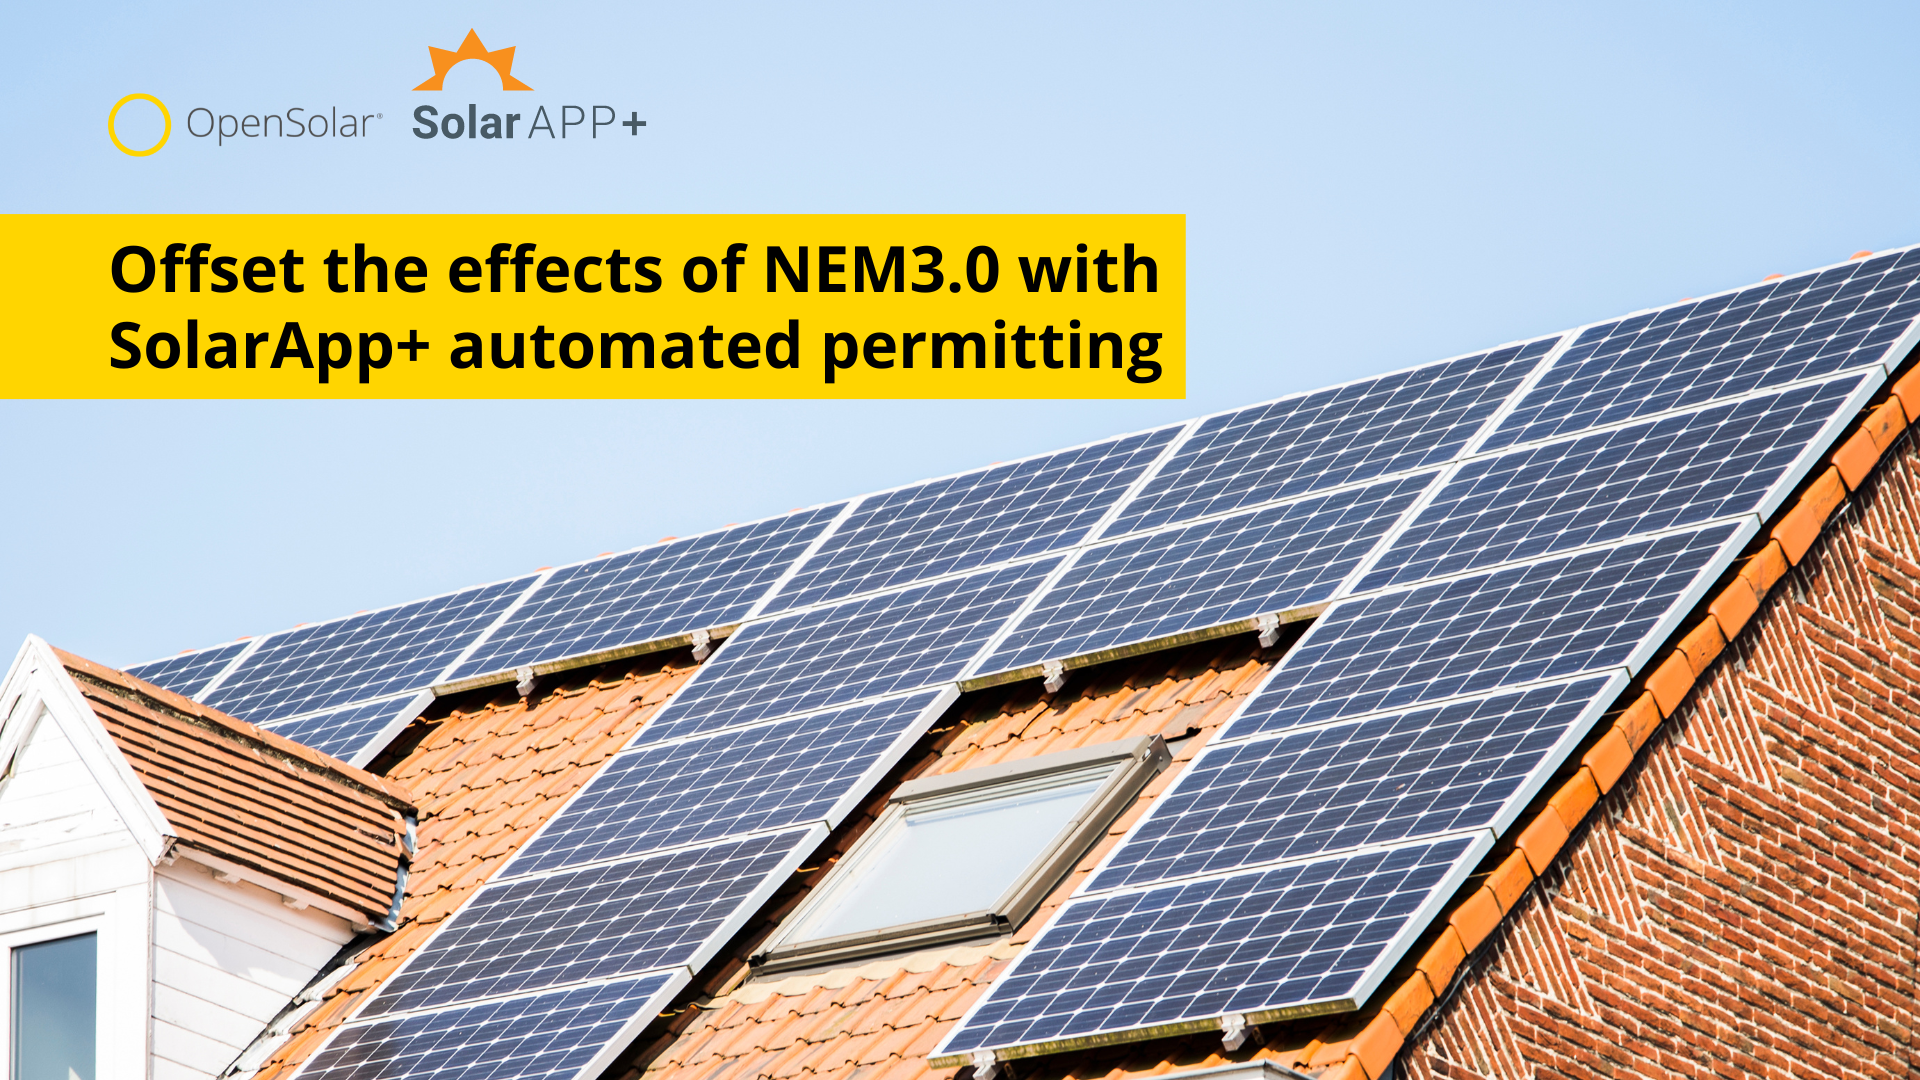 Offset the effects of NEM3.0 with SolarApp+ automated permitting